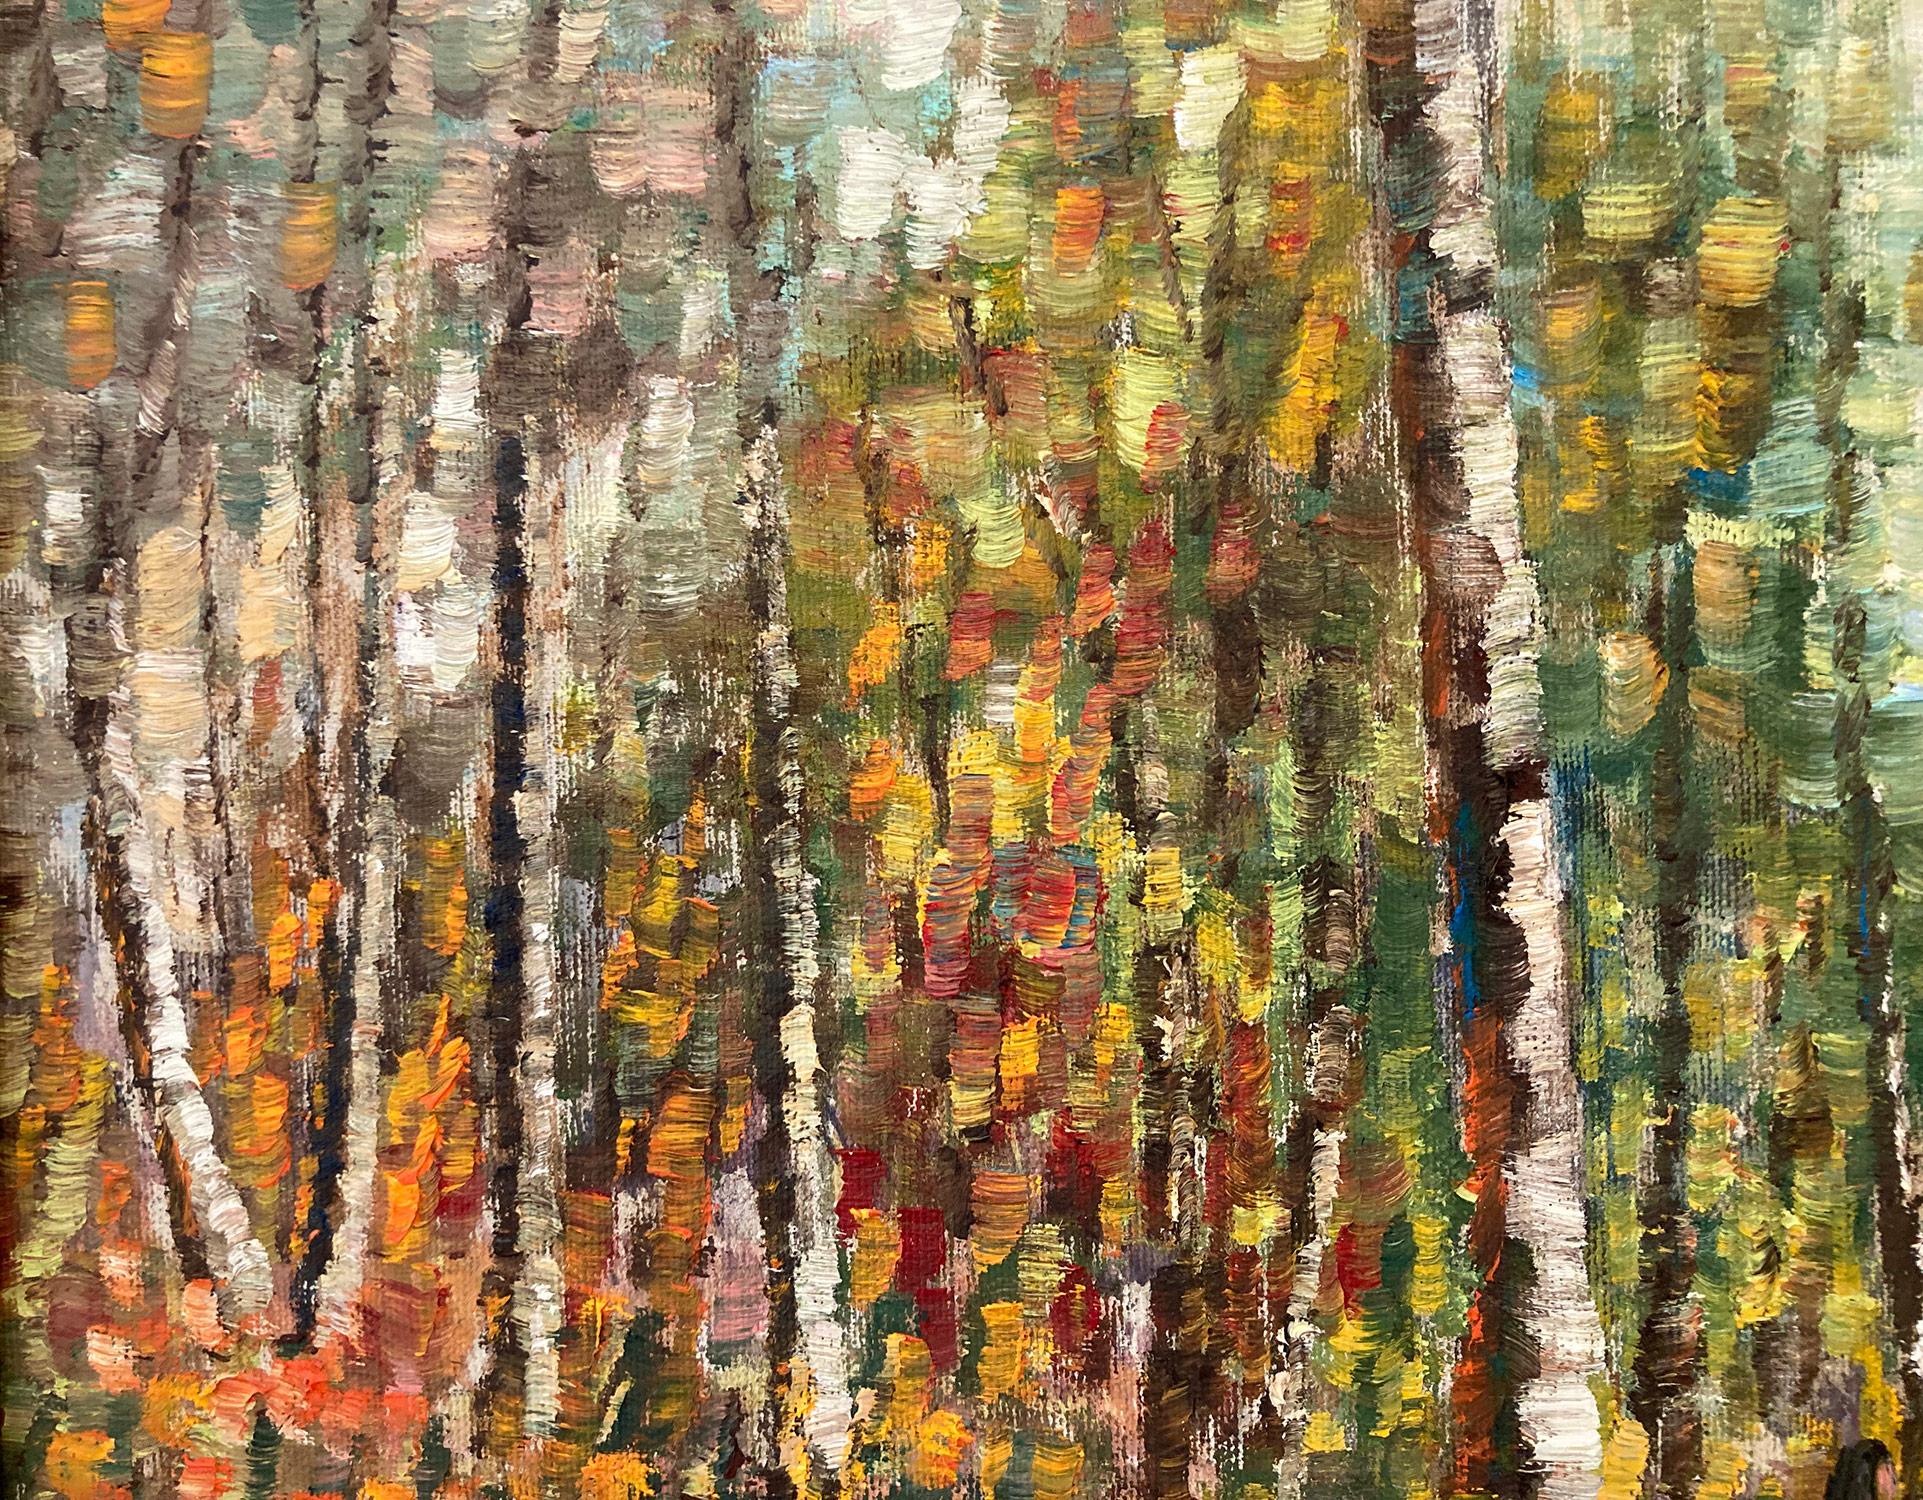 A stunning depiction Figures walking in the forrest in a wooded area. Nemethy uses a bold impressionistic technique with thick use of paint and wonderful impressions. With unique colors from the North East, we can feel the atmosphere effortlessly.